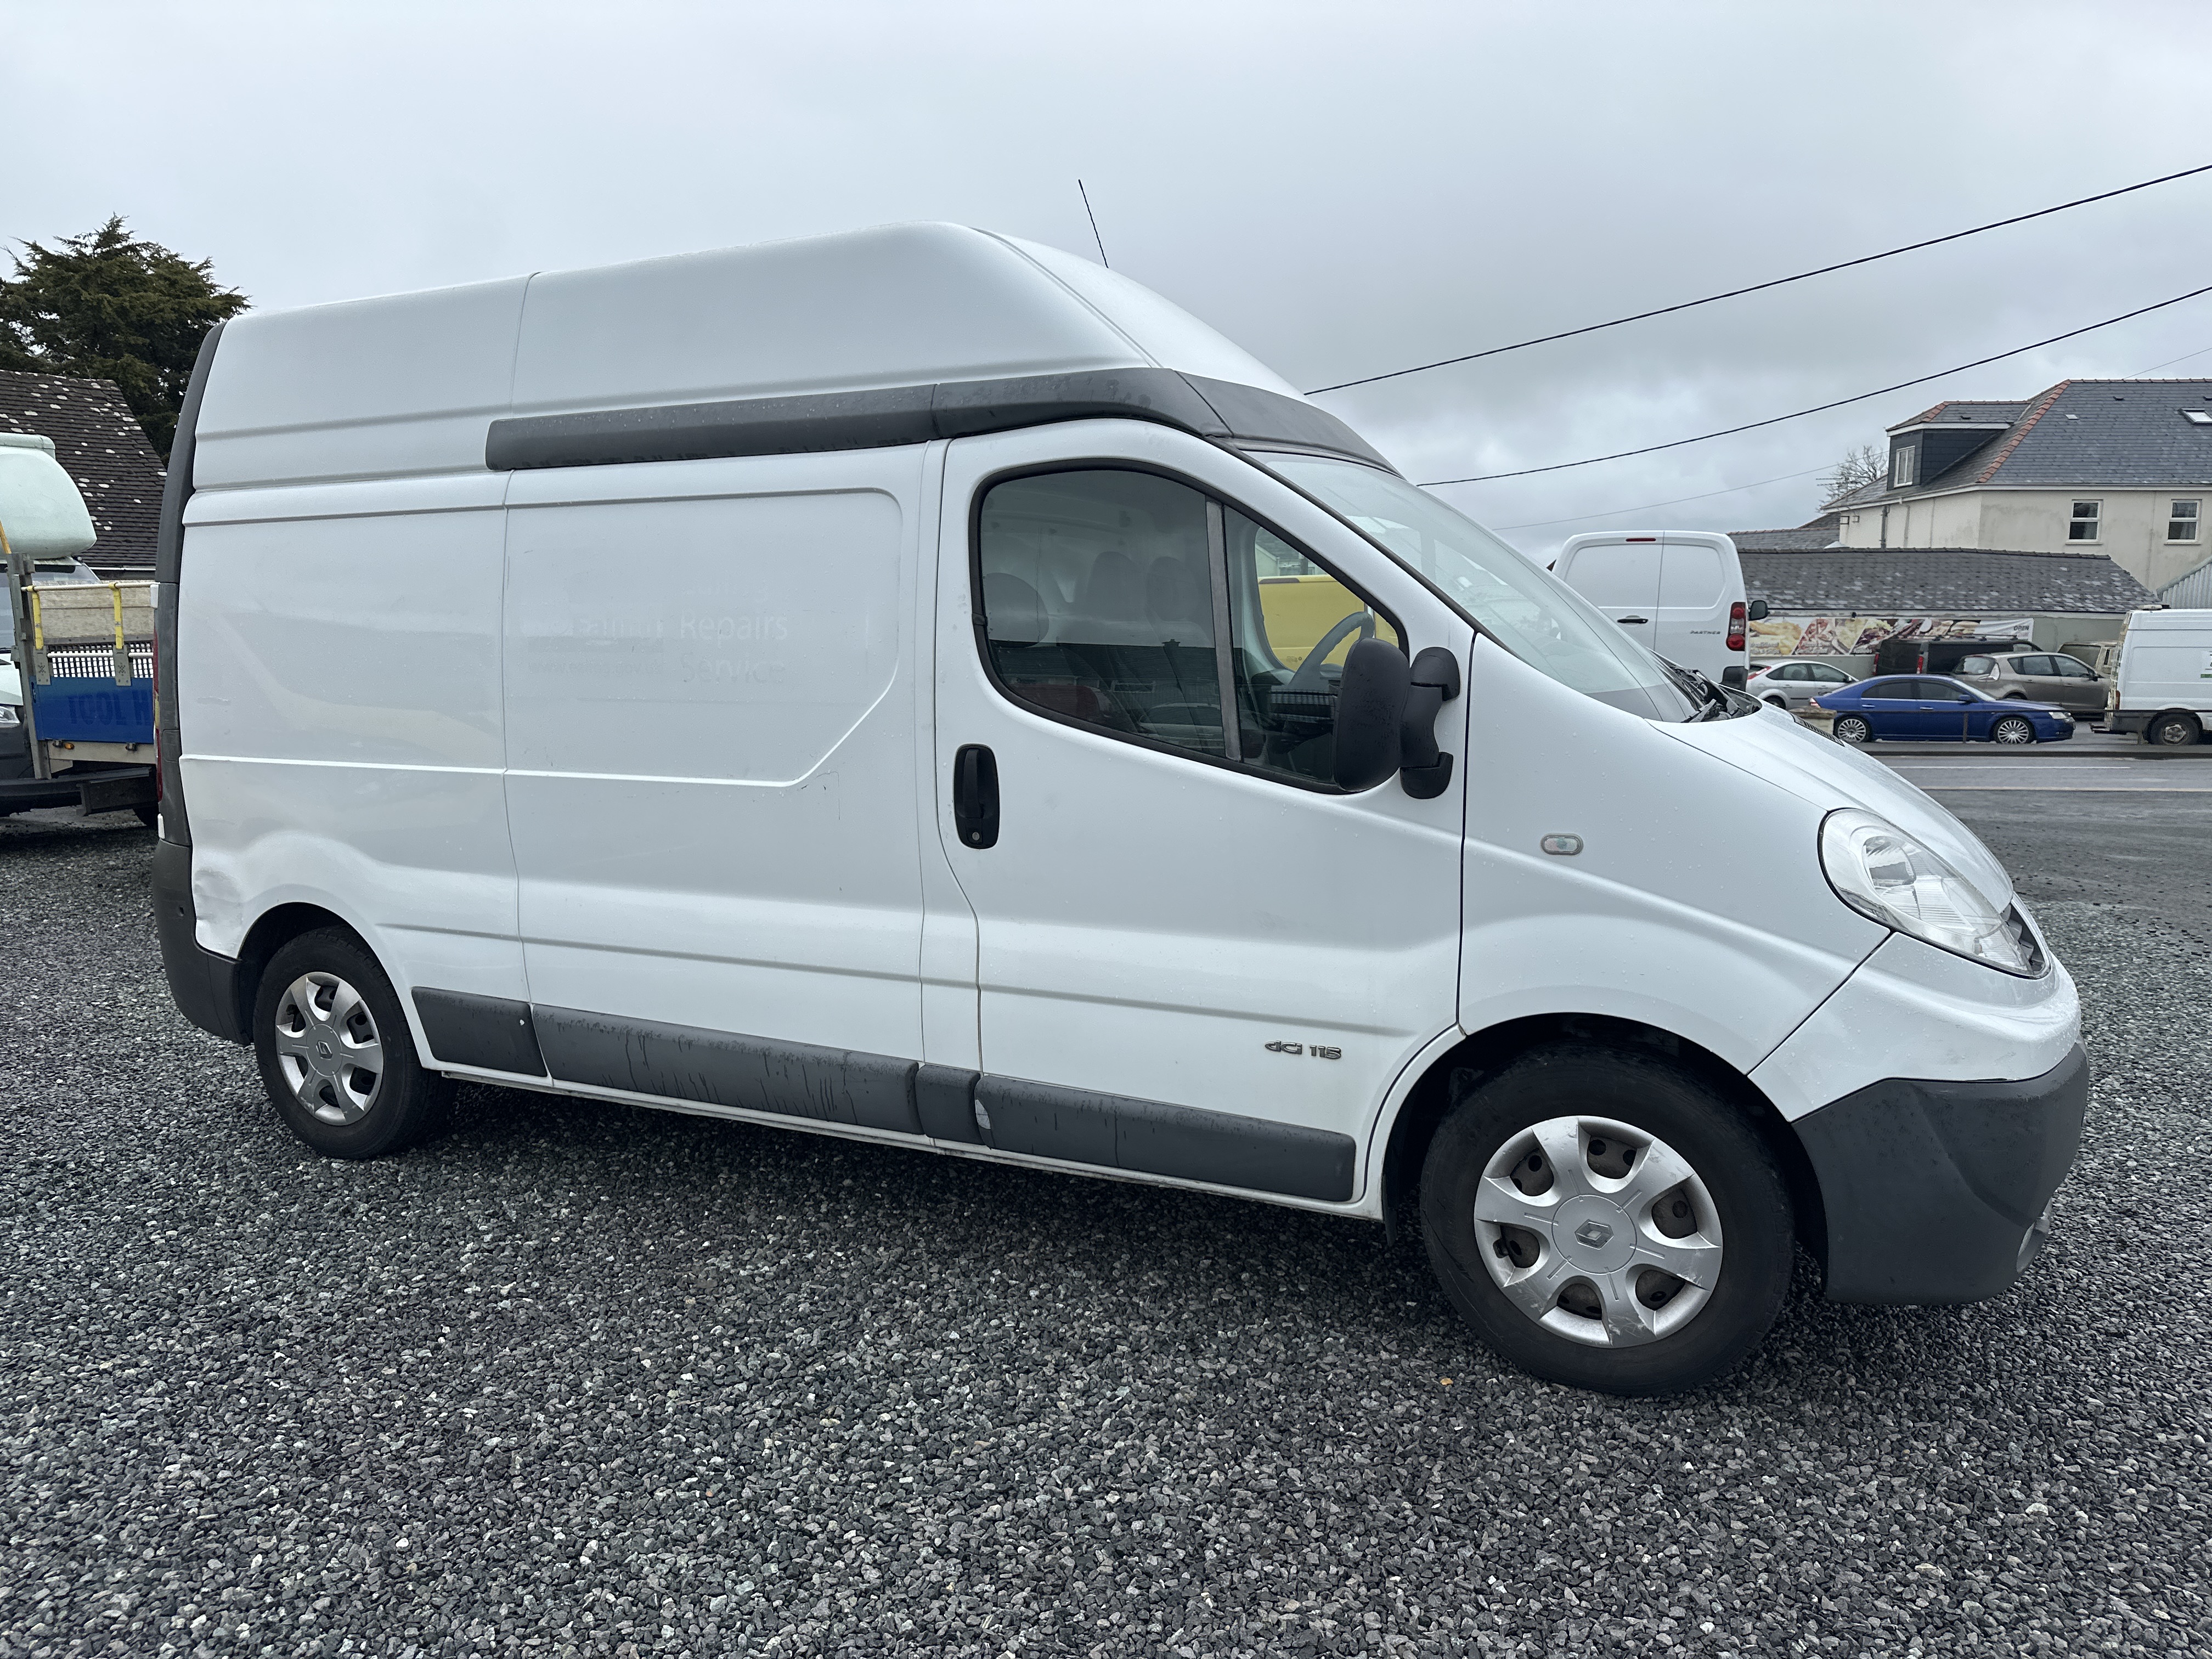 Renault TRAFFIC LH29 DCI HIGHTOP for sale at Mike Howlin Motor Sales Pembrokeshire